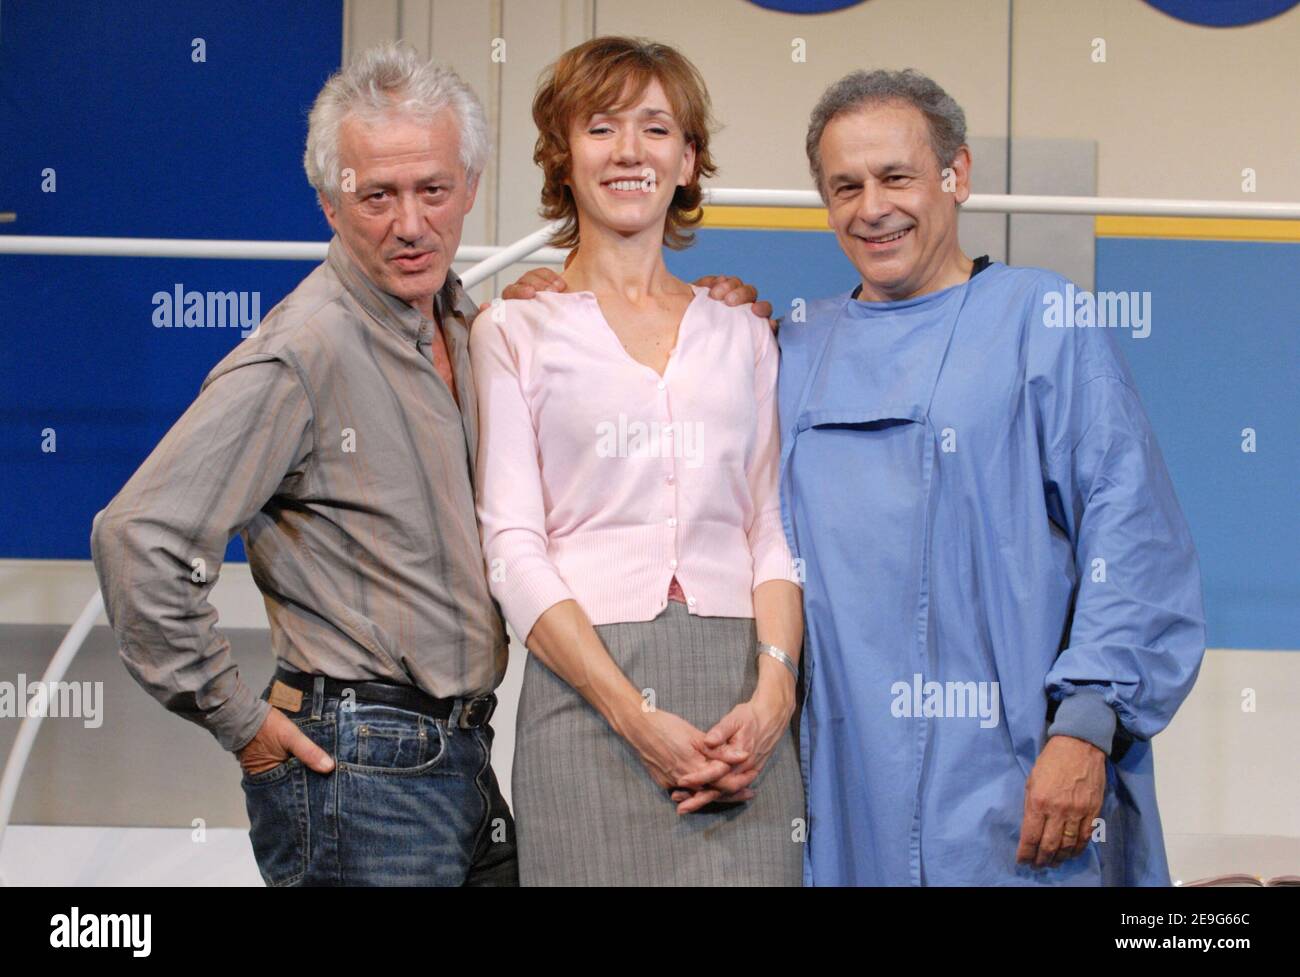 Director Jean-Luc Moreau and cast members Francis Perrin and Virginie  Lemoine pose together during the press rehearsals of their new play 'Si  c'etait a refaire' at the 'Theatre de la Renaissance' in